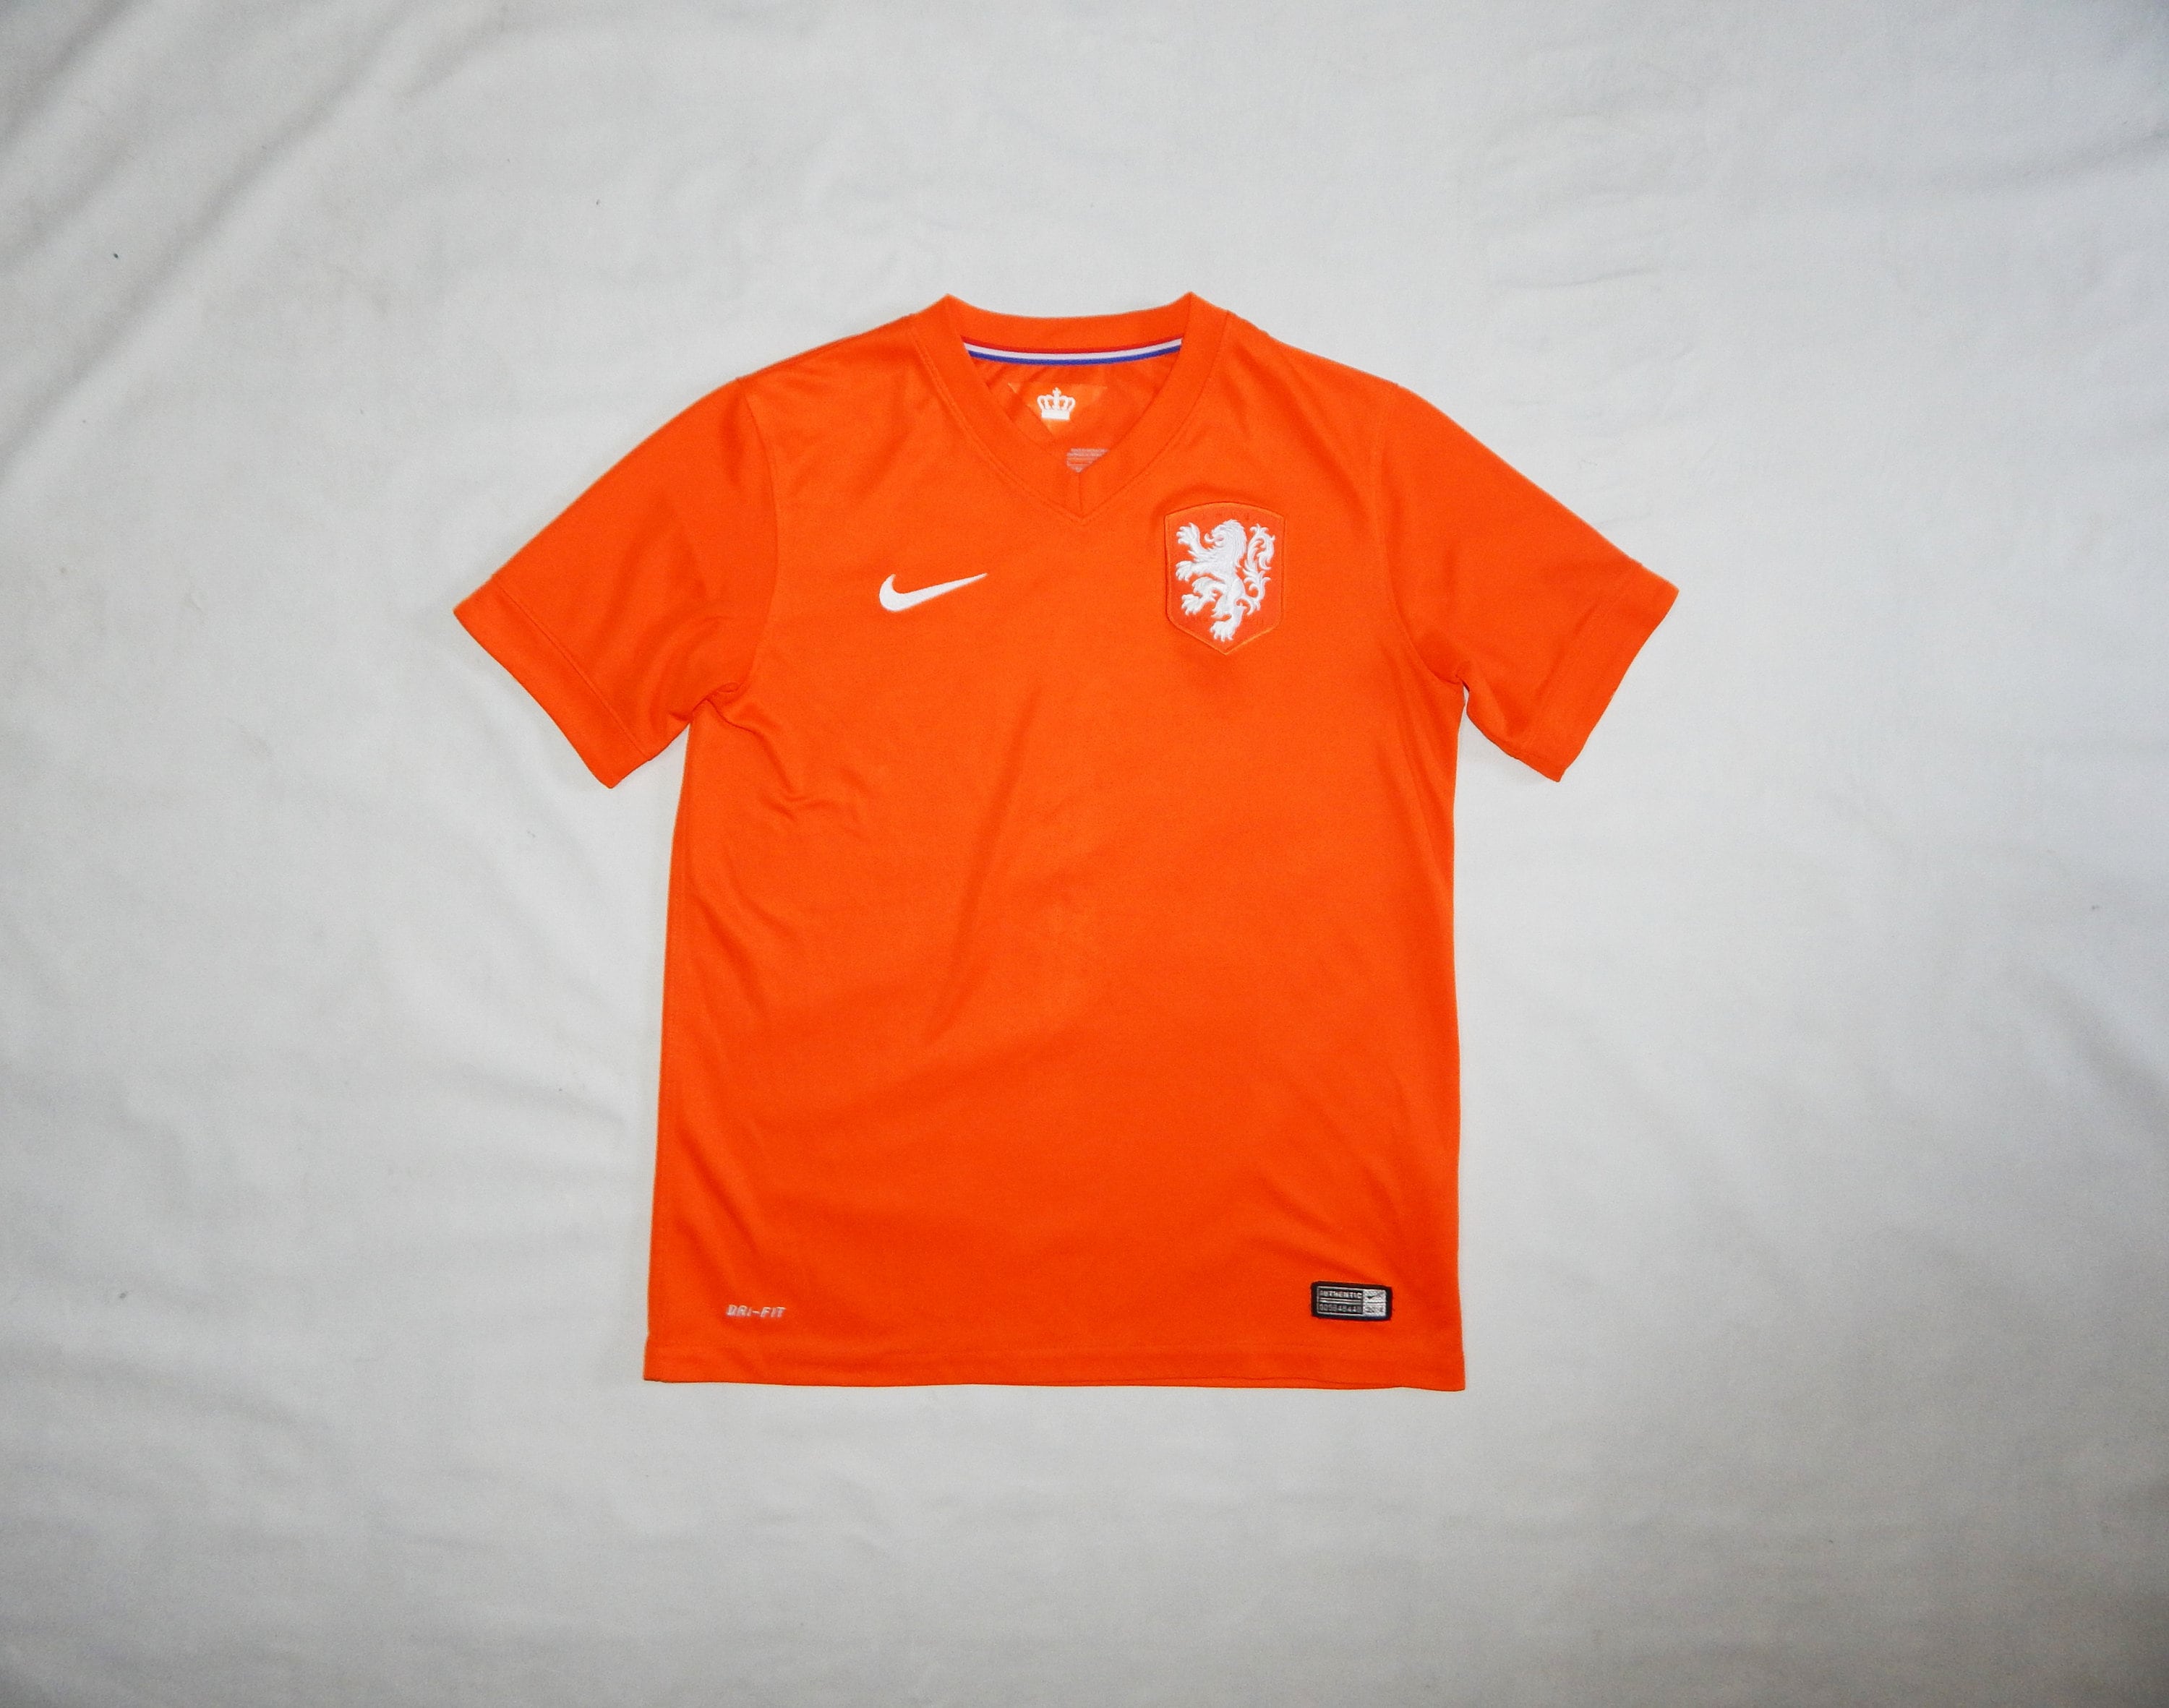 Nike Holland Netherlands Official 2014 Football Soccer Jersey, Size 12-13  Years, Orange Colour -  Canada